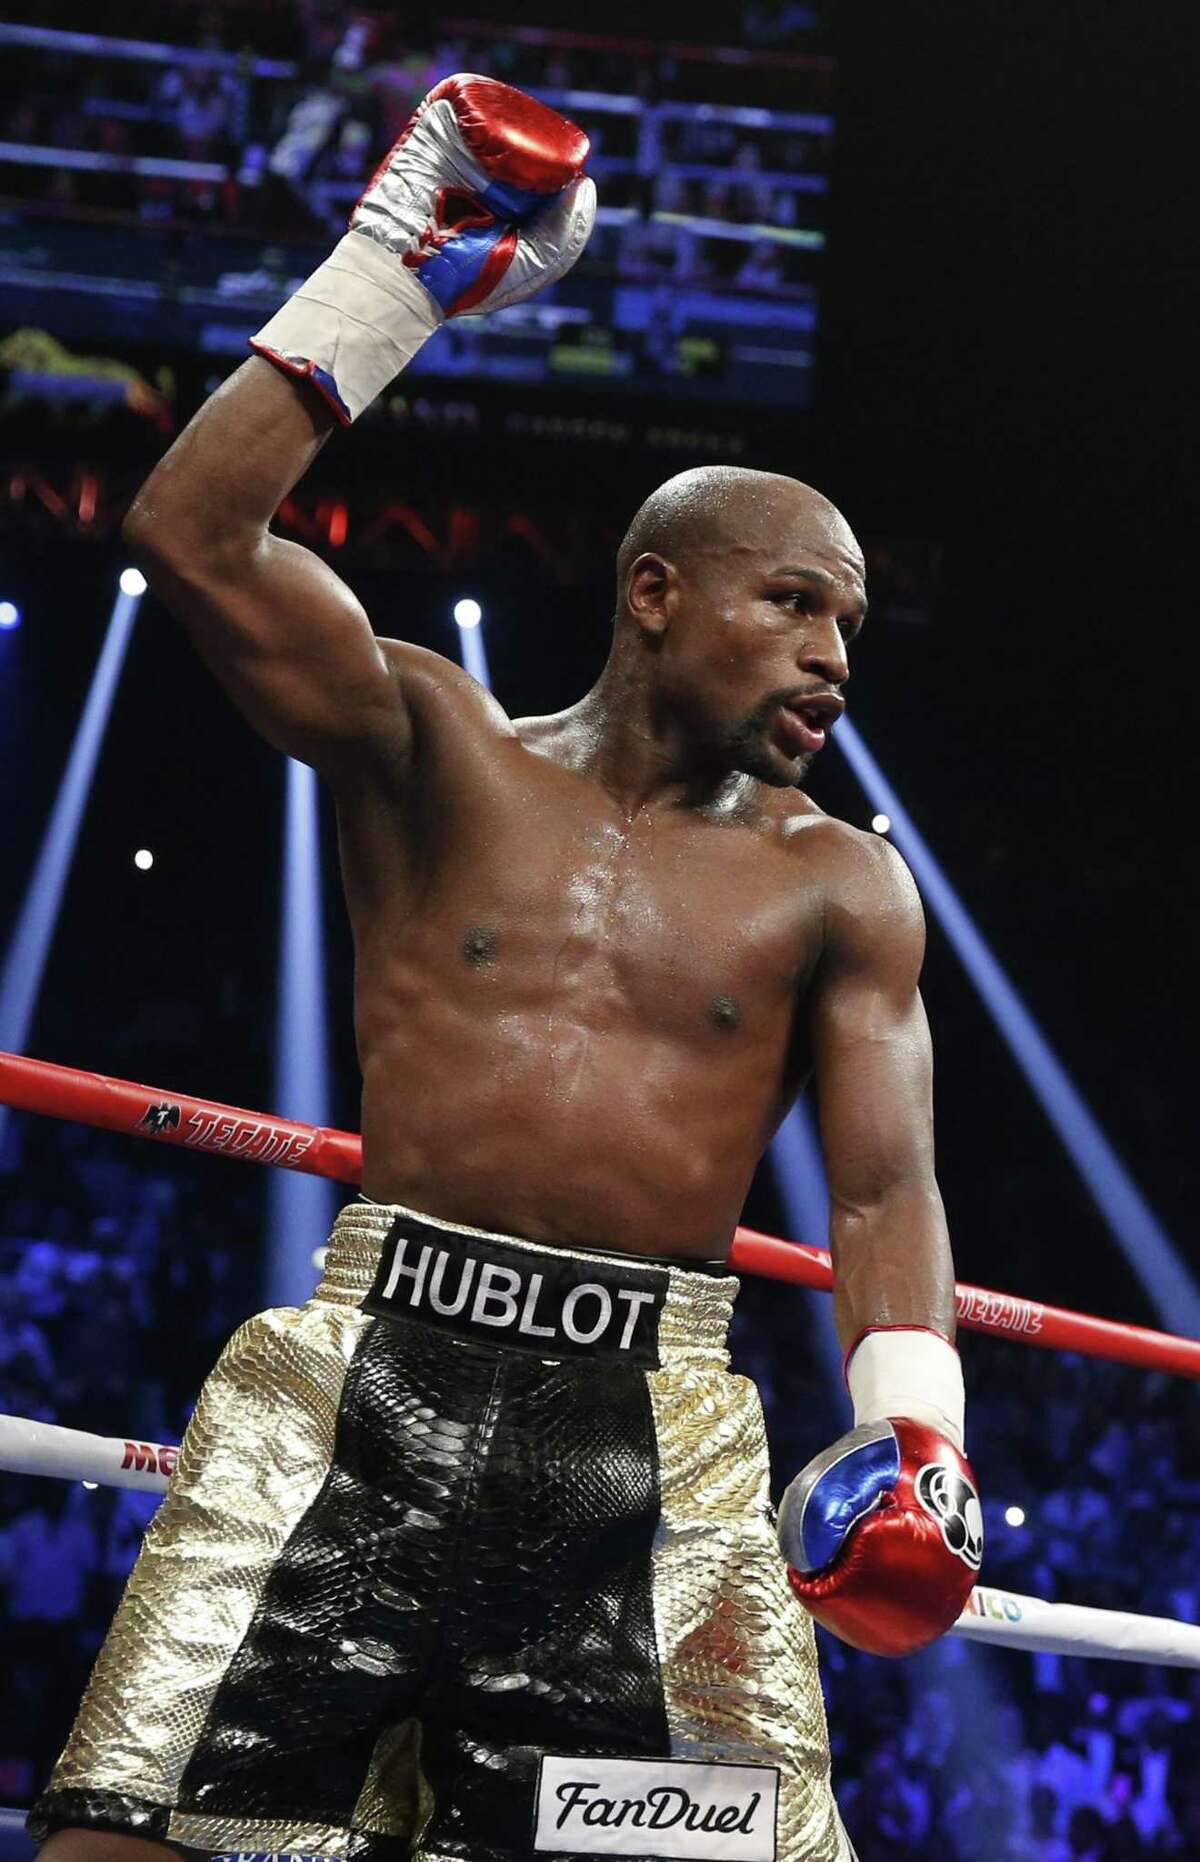 Floyd Mayweather Jr. celebrates during his welterweight title fight against Manny Pacquiao, in Las Vegas on May 2, 2015. Conor McGregor has come to an agreement with UFC that has moved a proposed fight with Mayweather Jr. closer to reality.